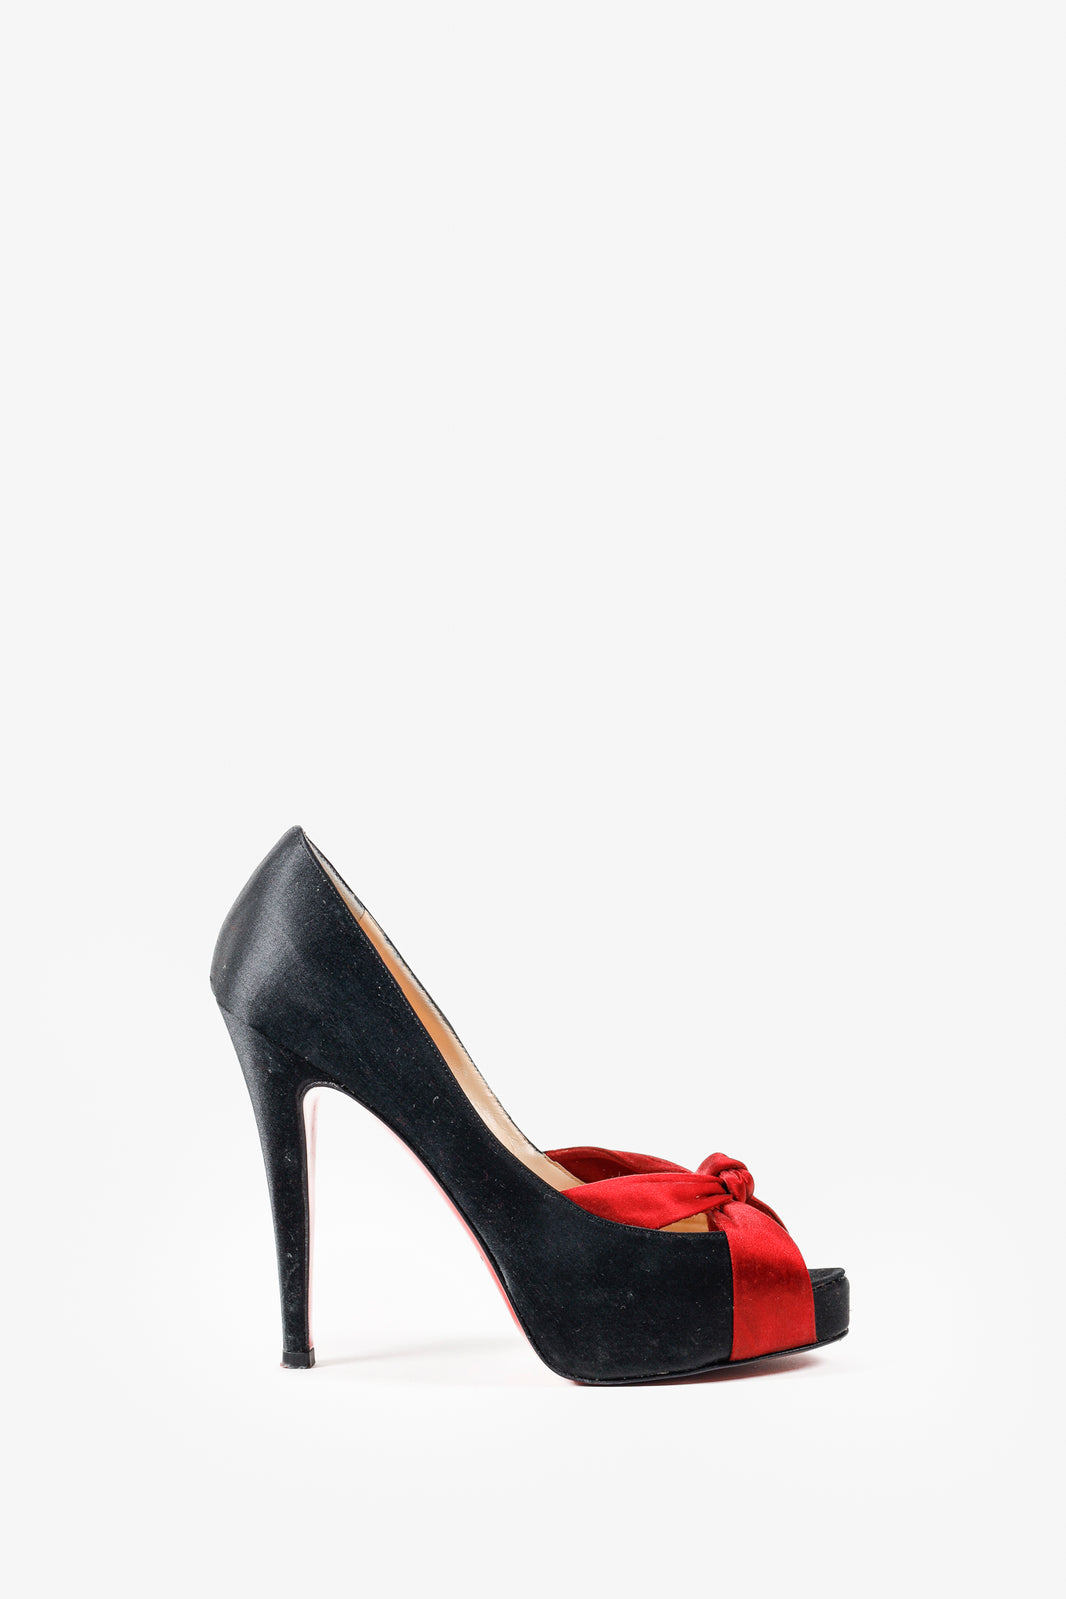 Christian Louboutin Satin Red Bow Pumps